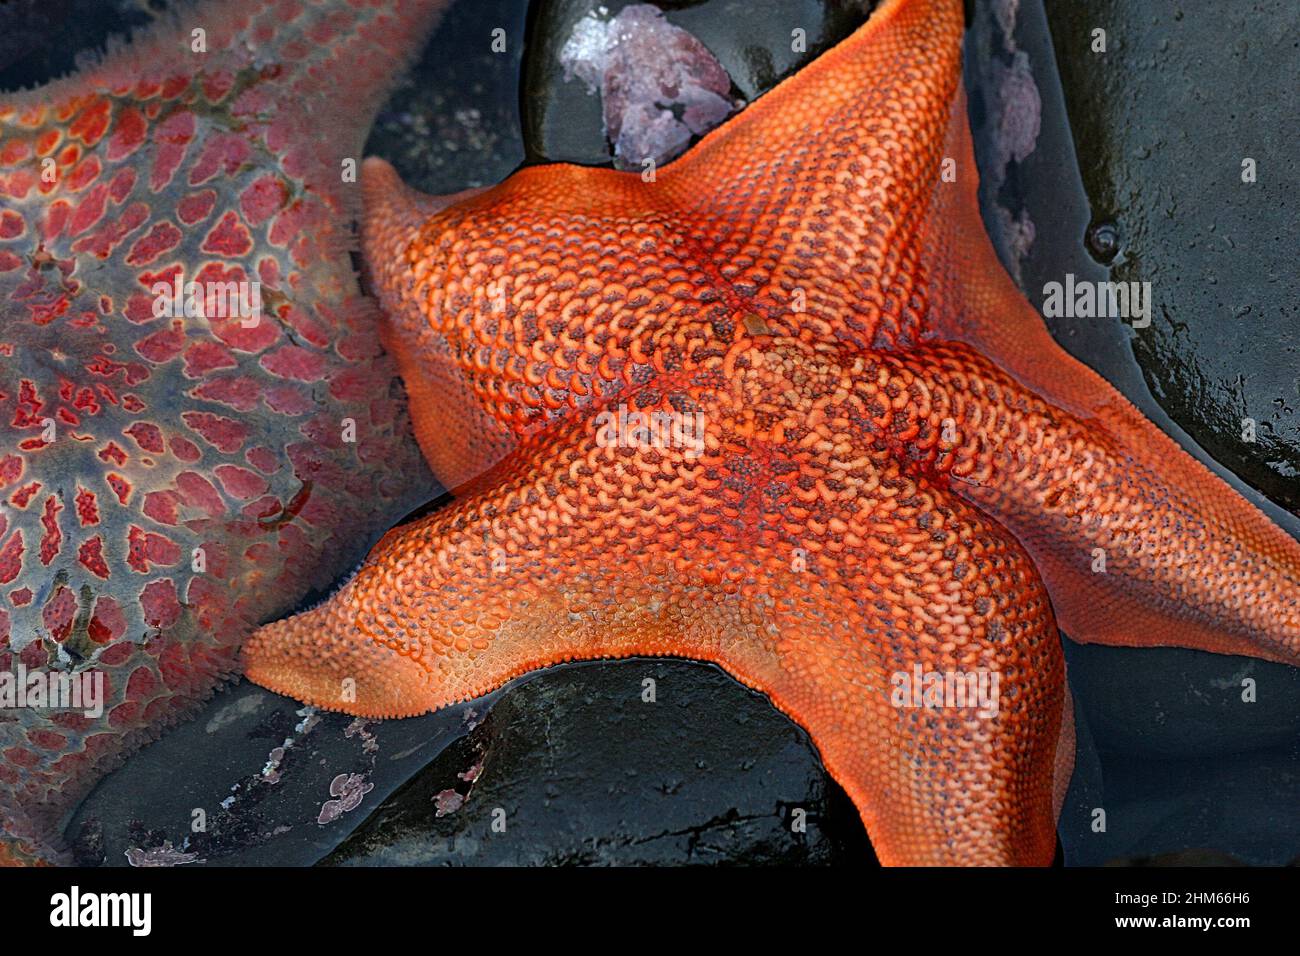 Close Up of Orange Patterned Starfish with Partial Other Starfish in Tide Pool Stock Photo